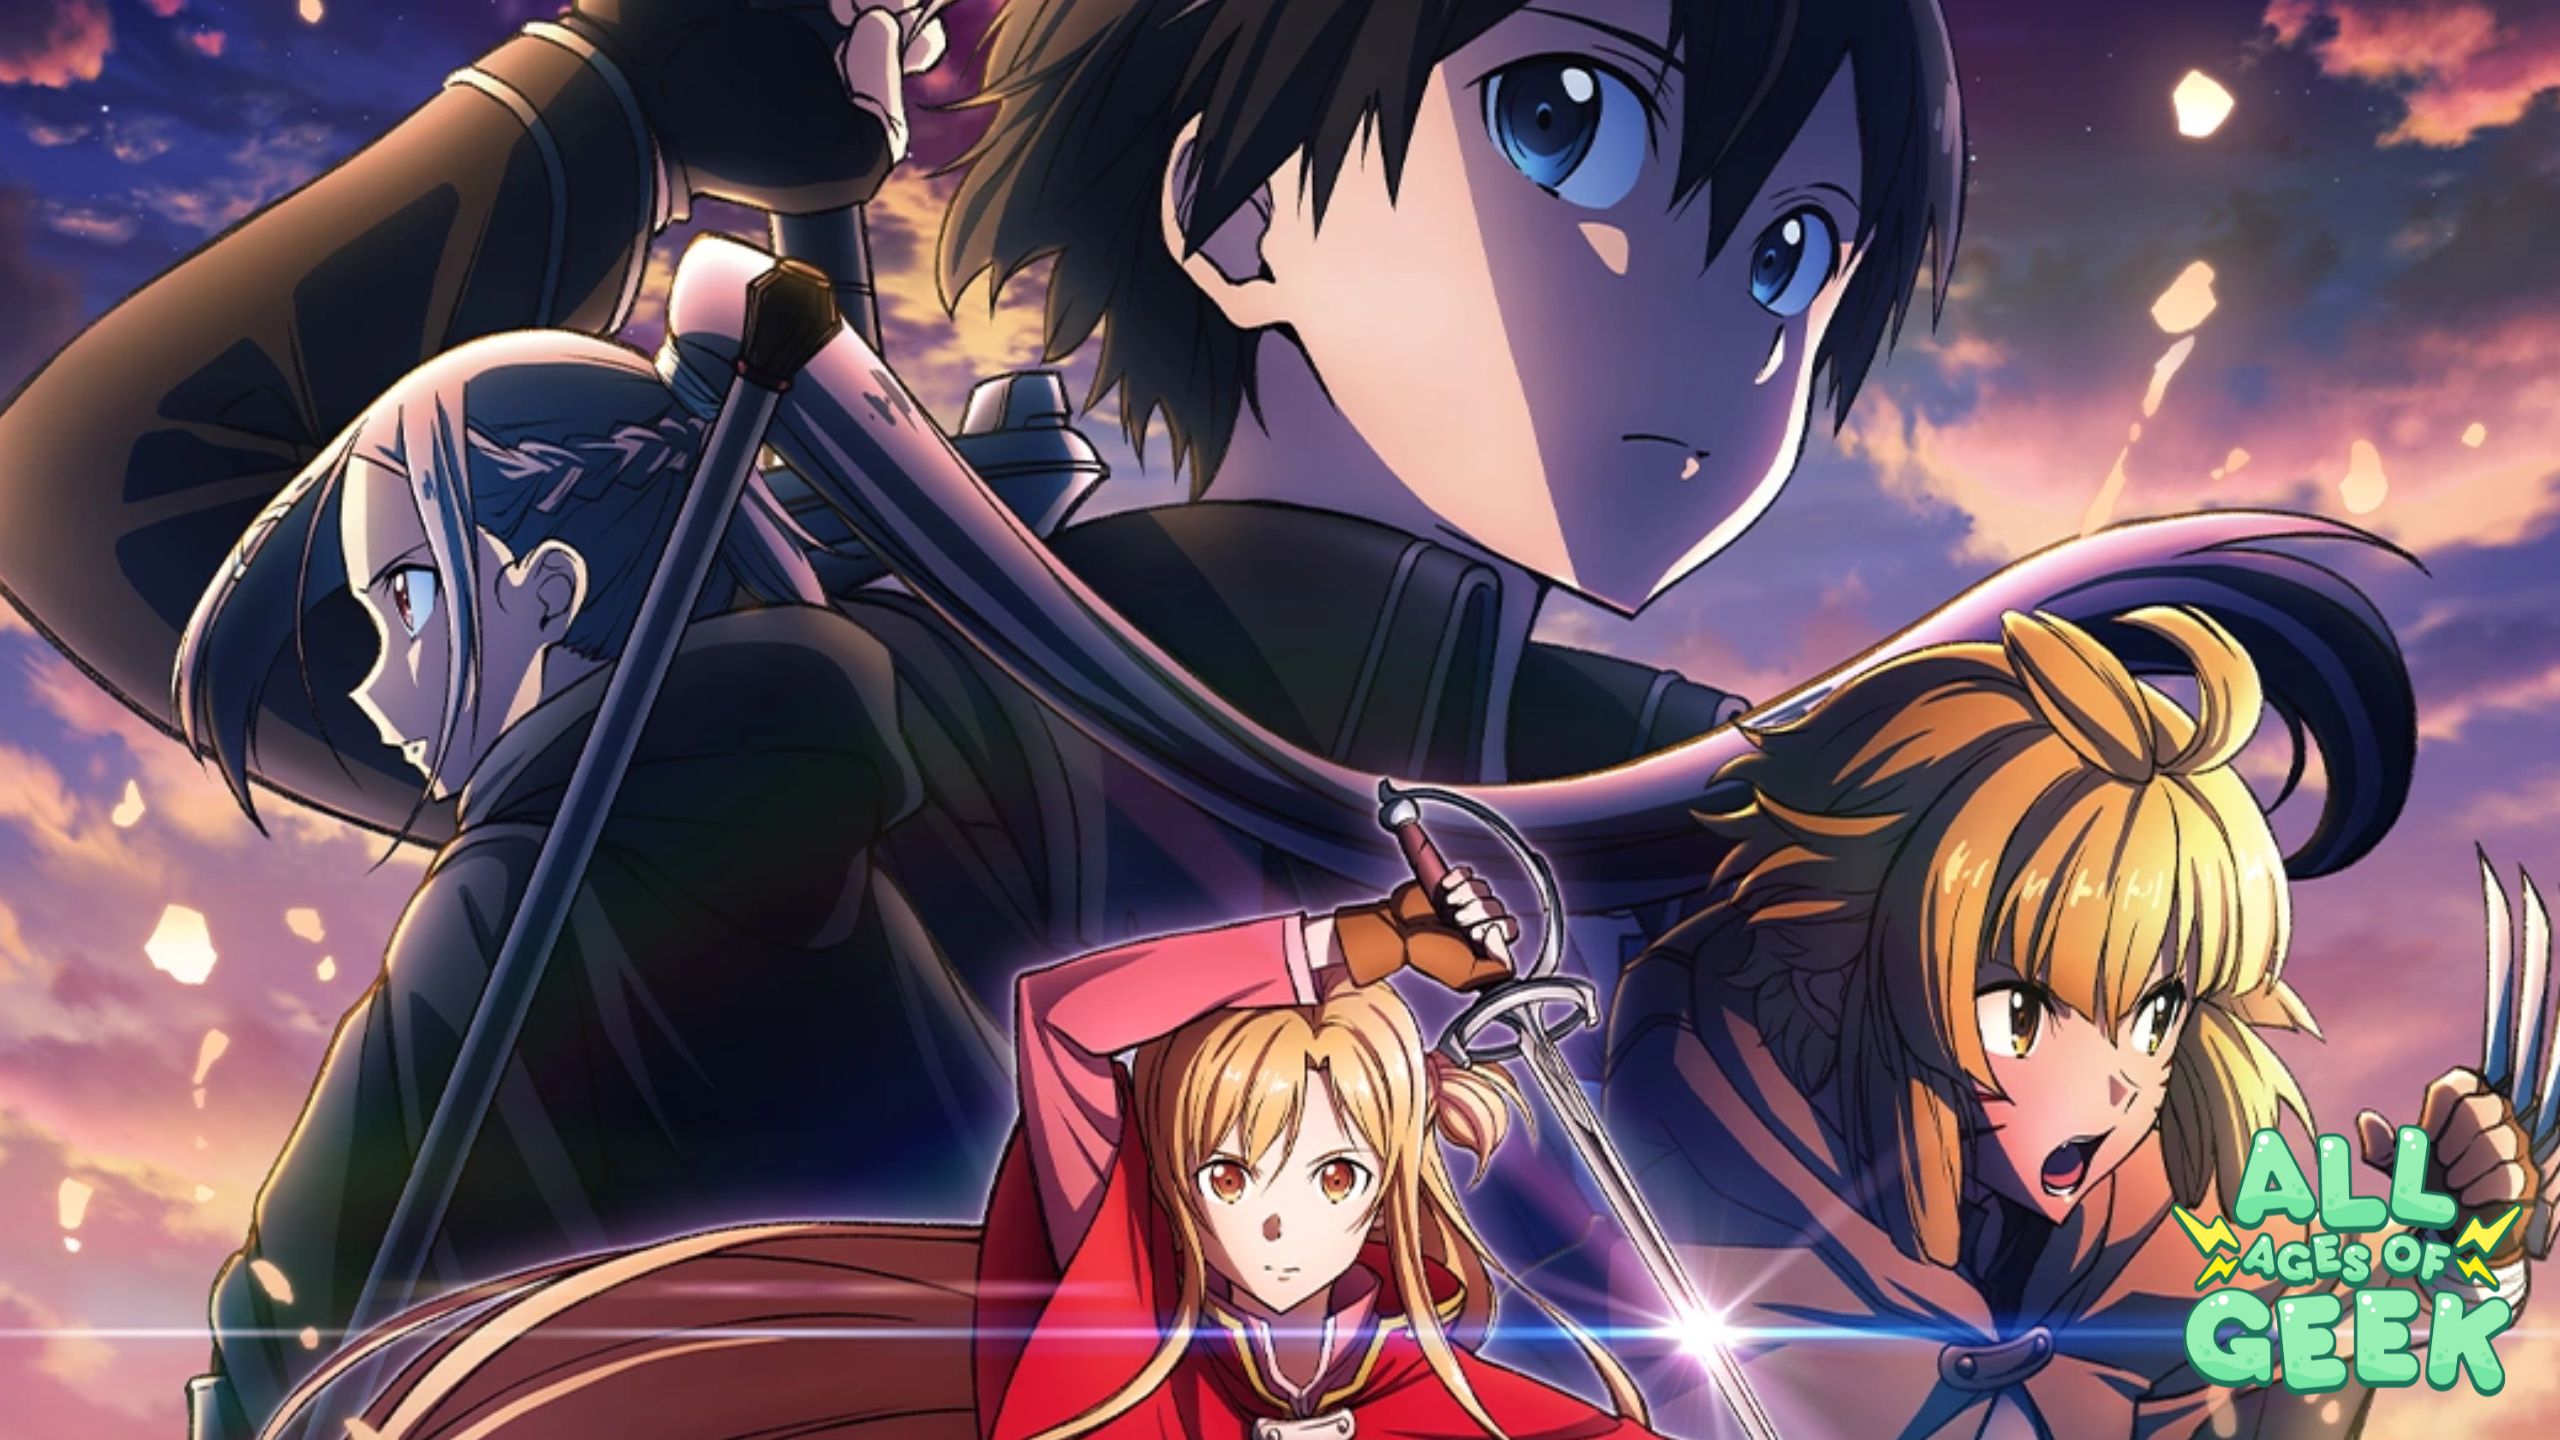 Where to find SAO Progressive at All Ages of Geek